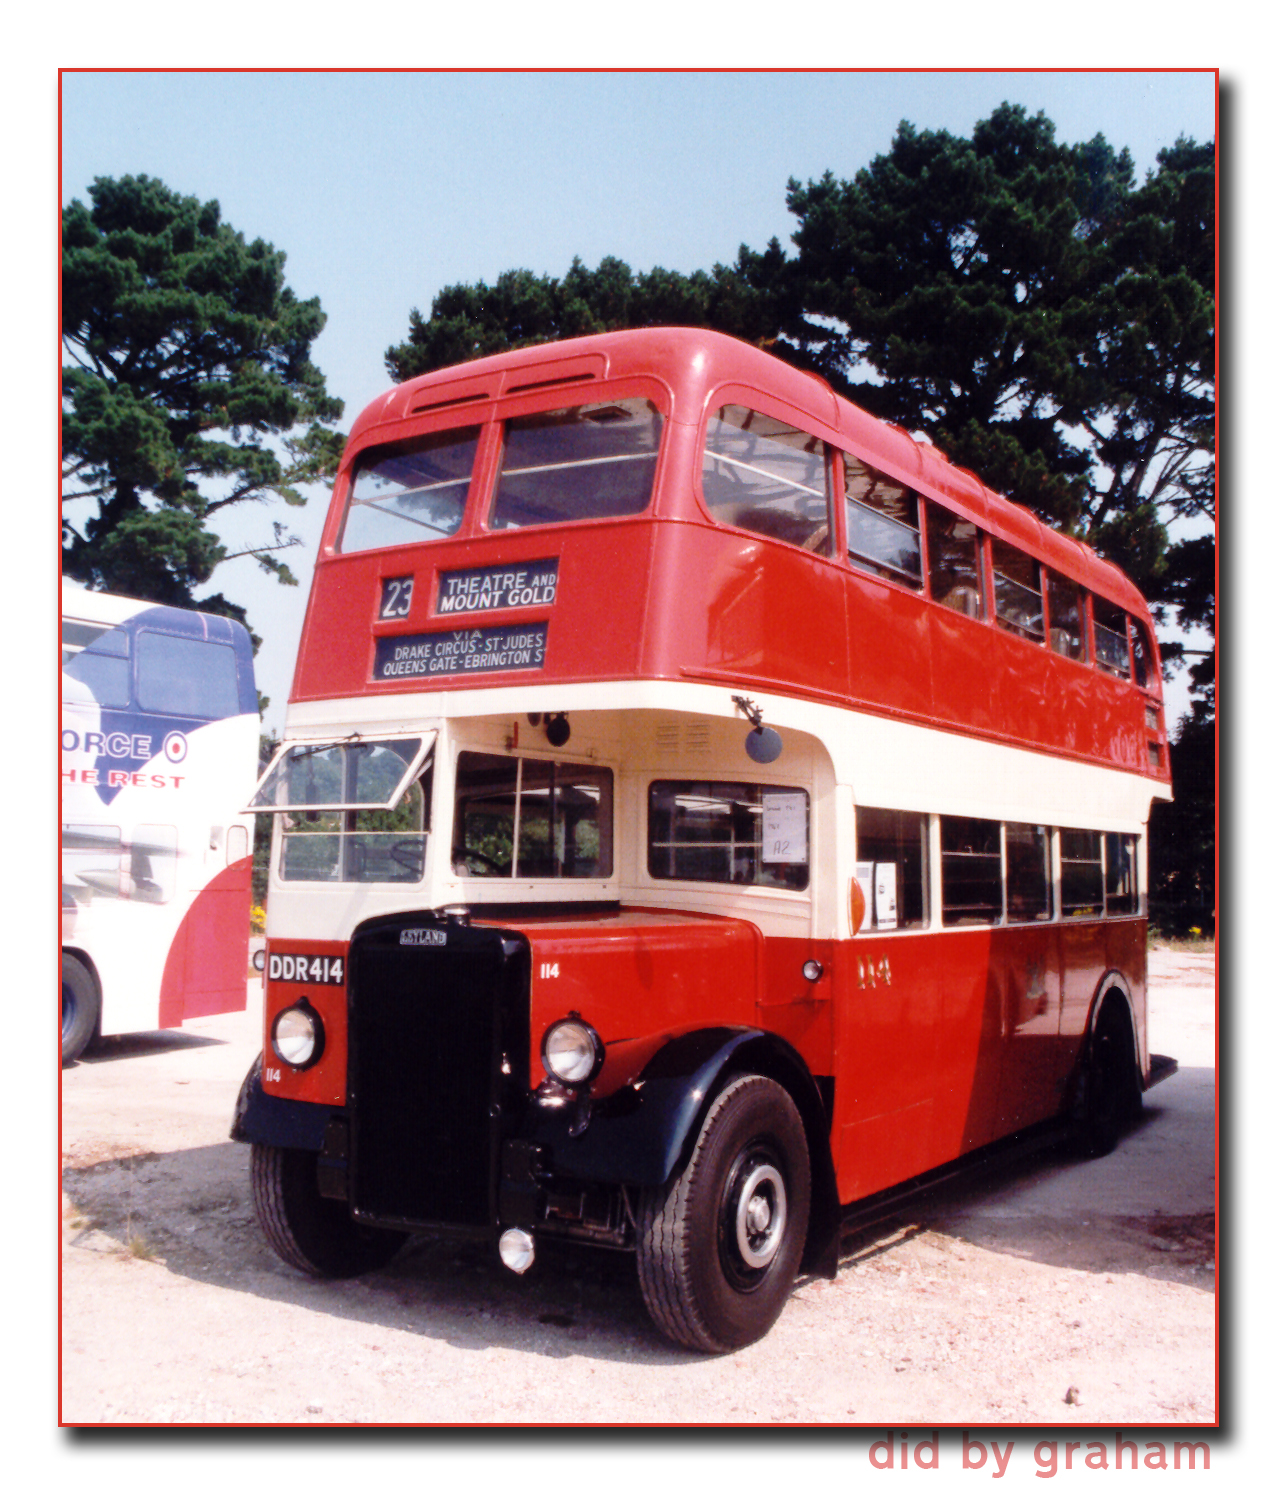 a double decker bus is parked in the gravel